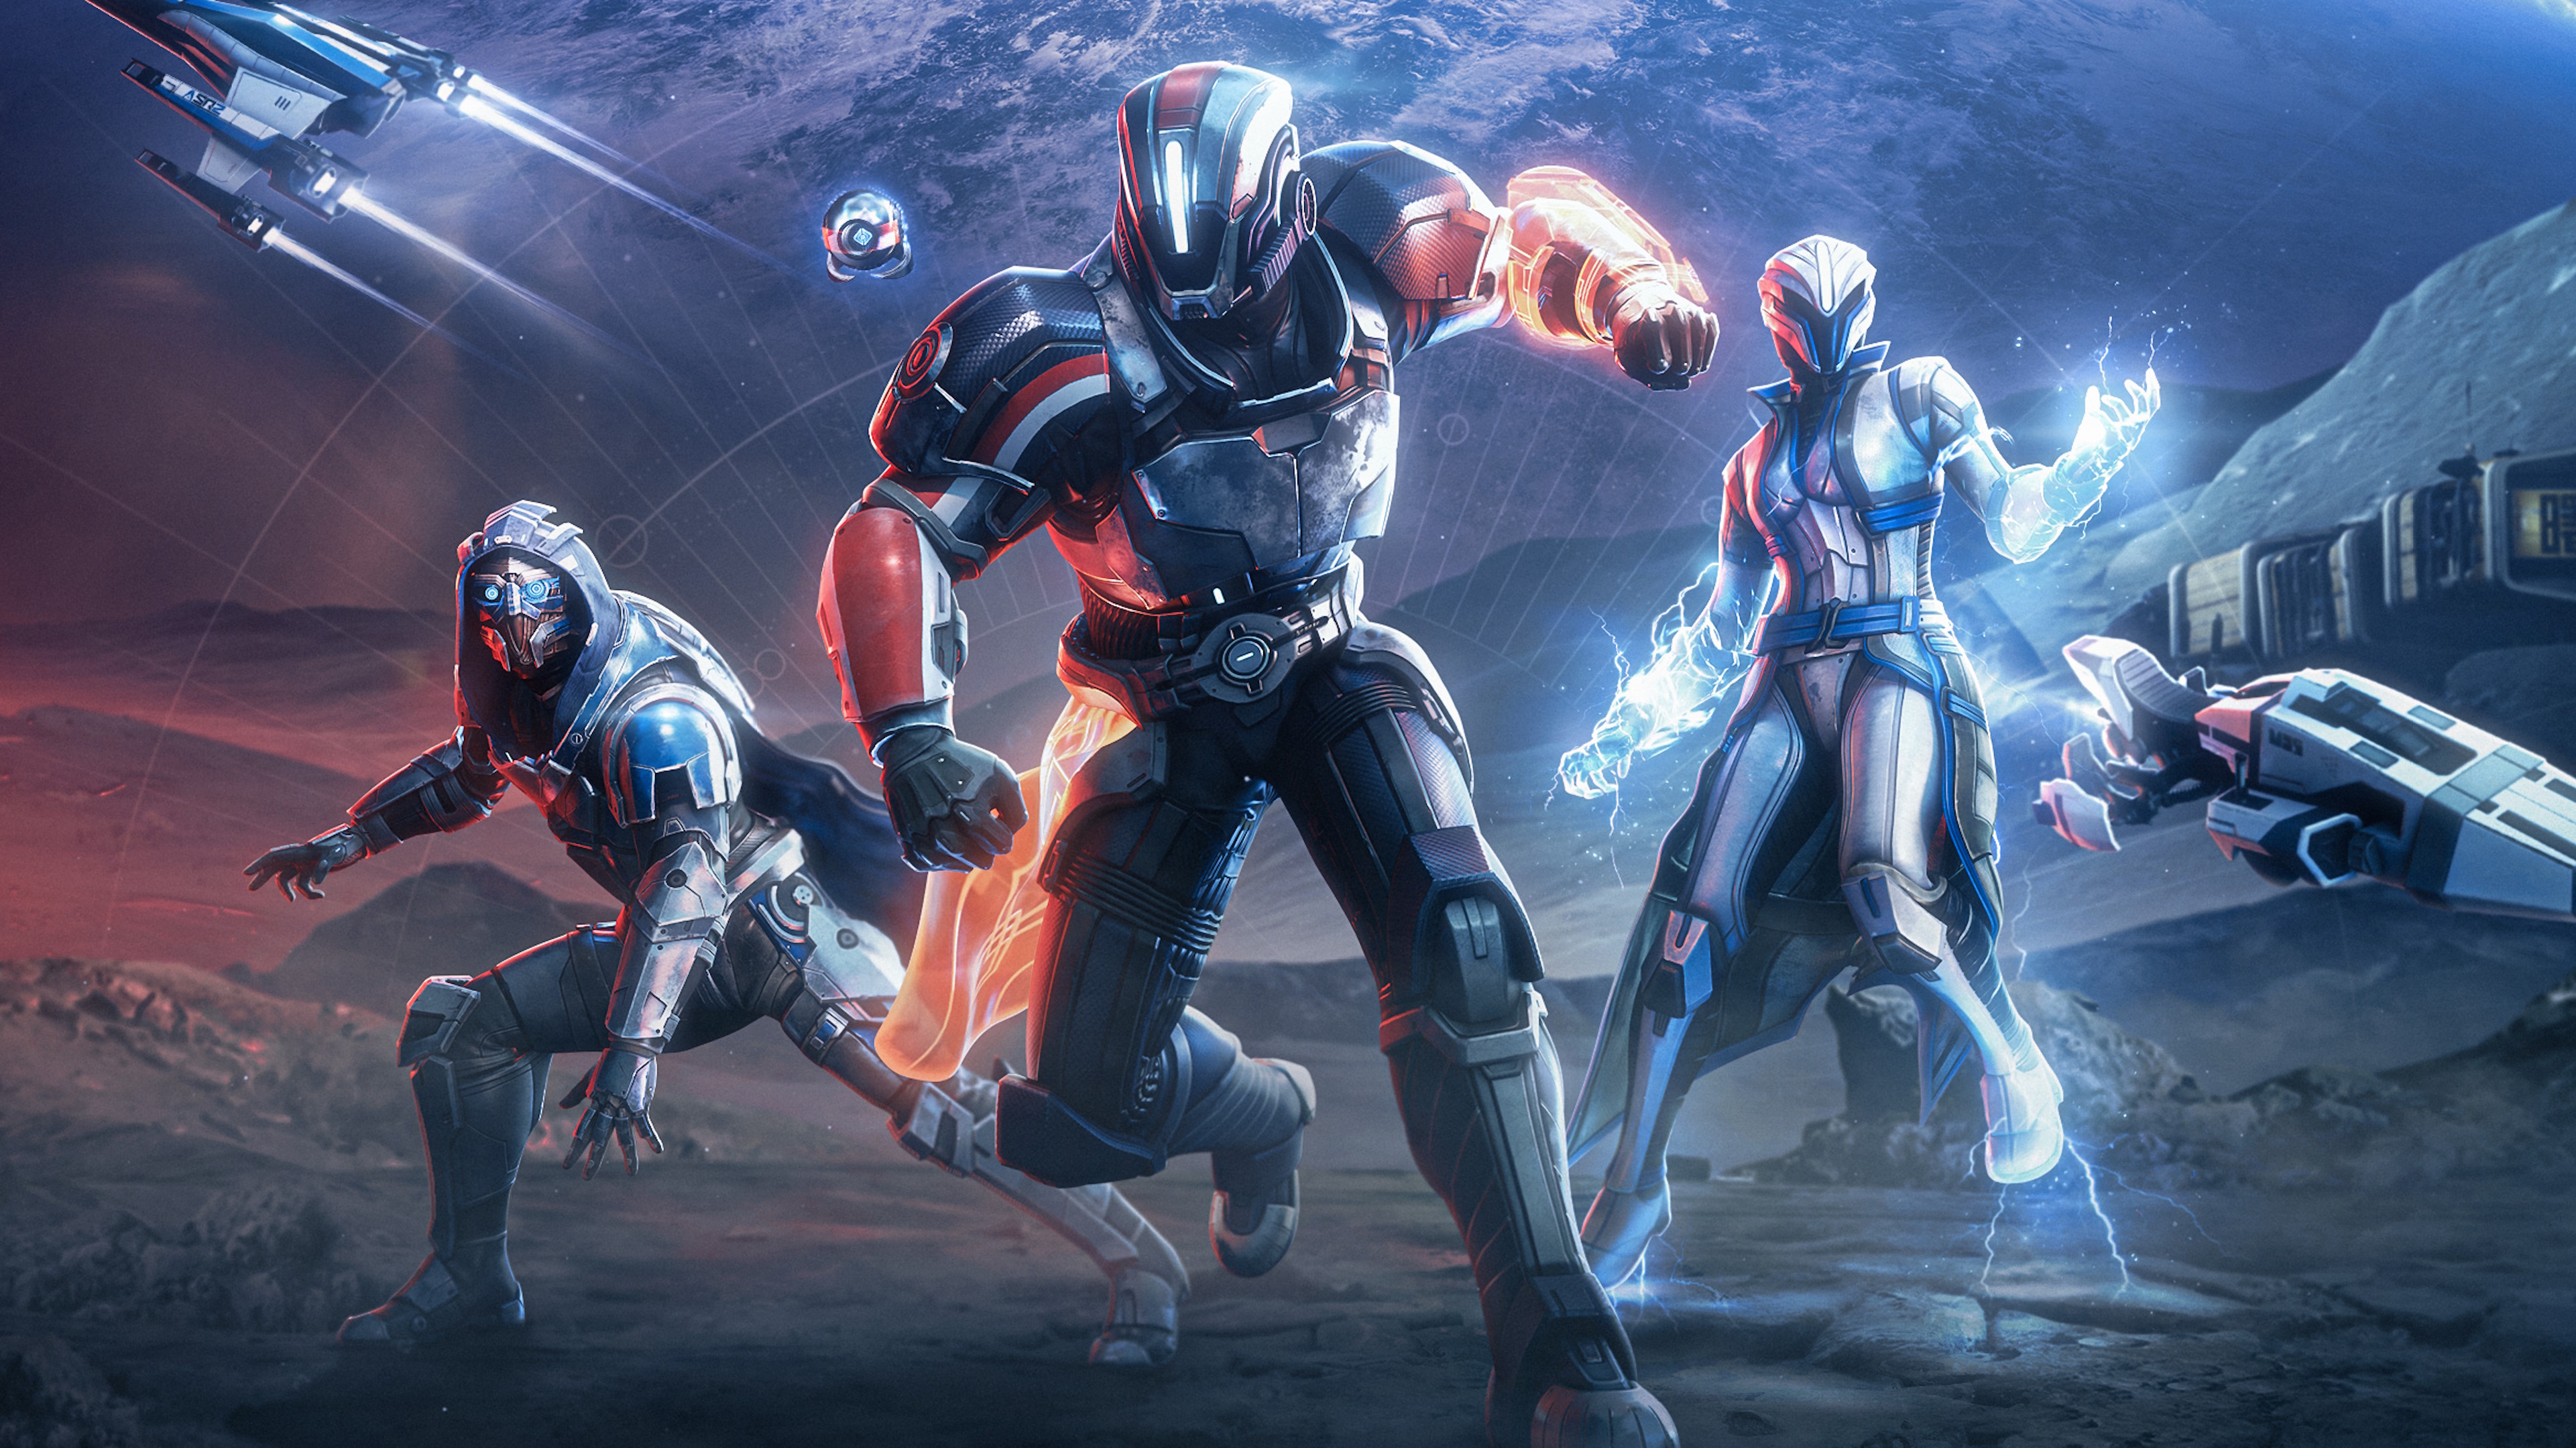  Bungie hopes Destiny 2's new Mass Effect armor sets will be your favorite cosmetics on The Tower 